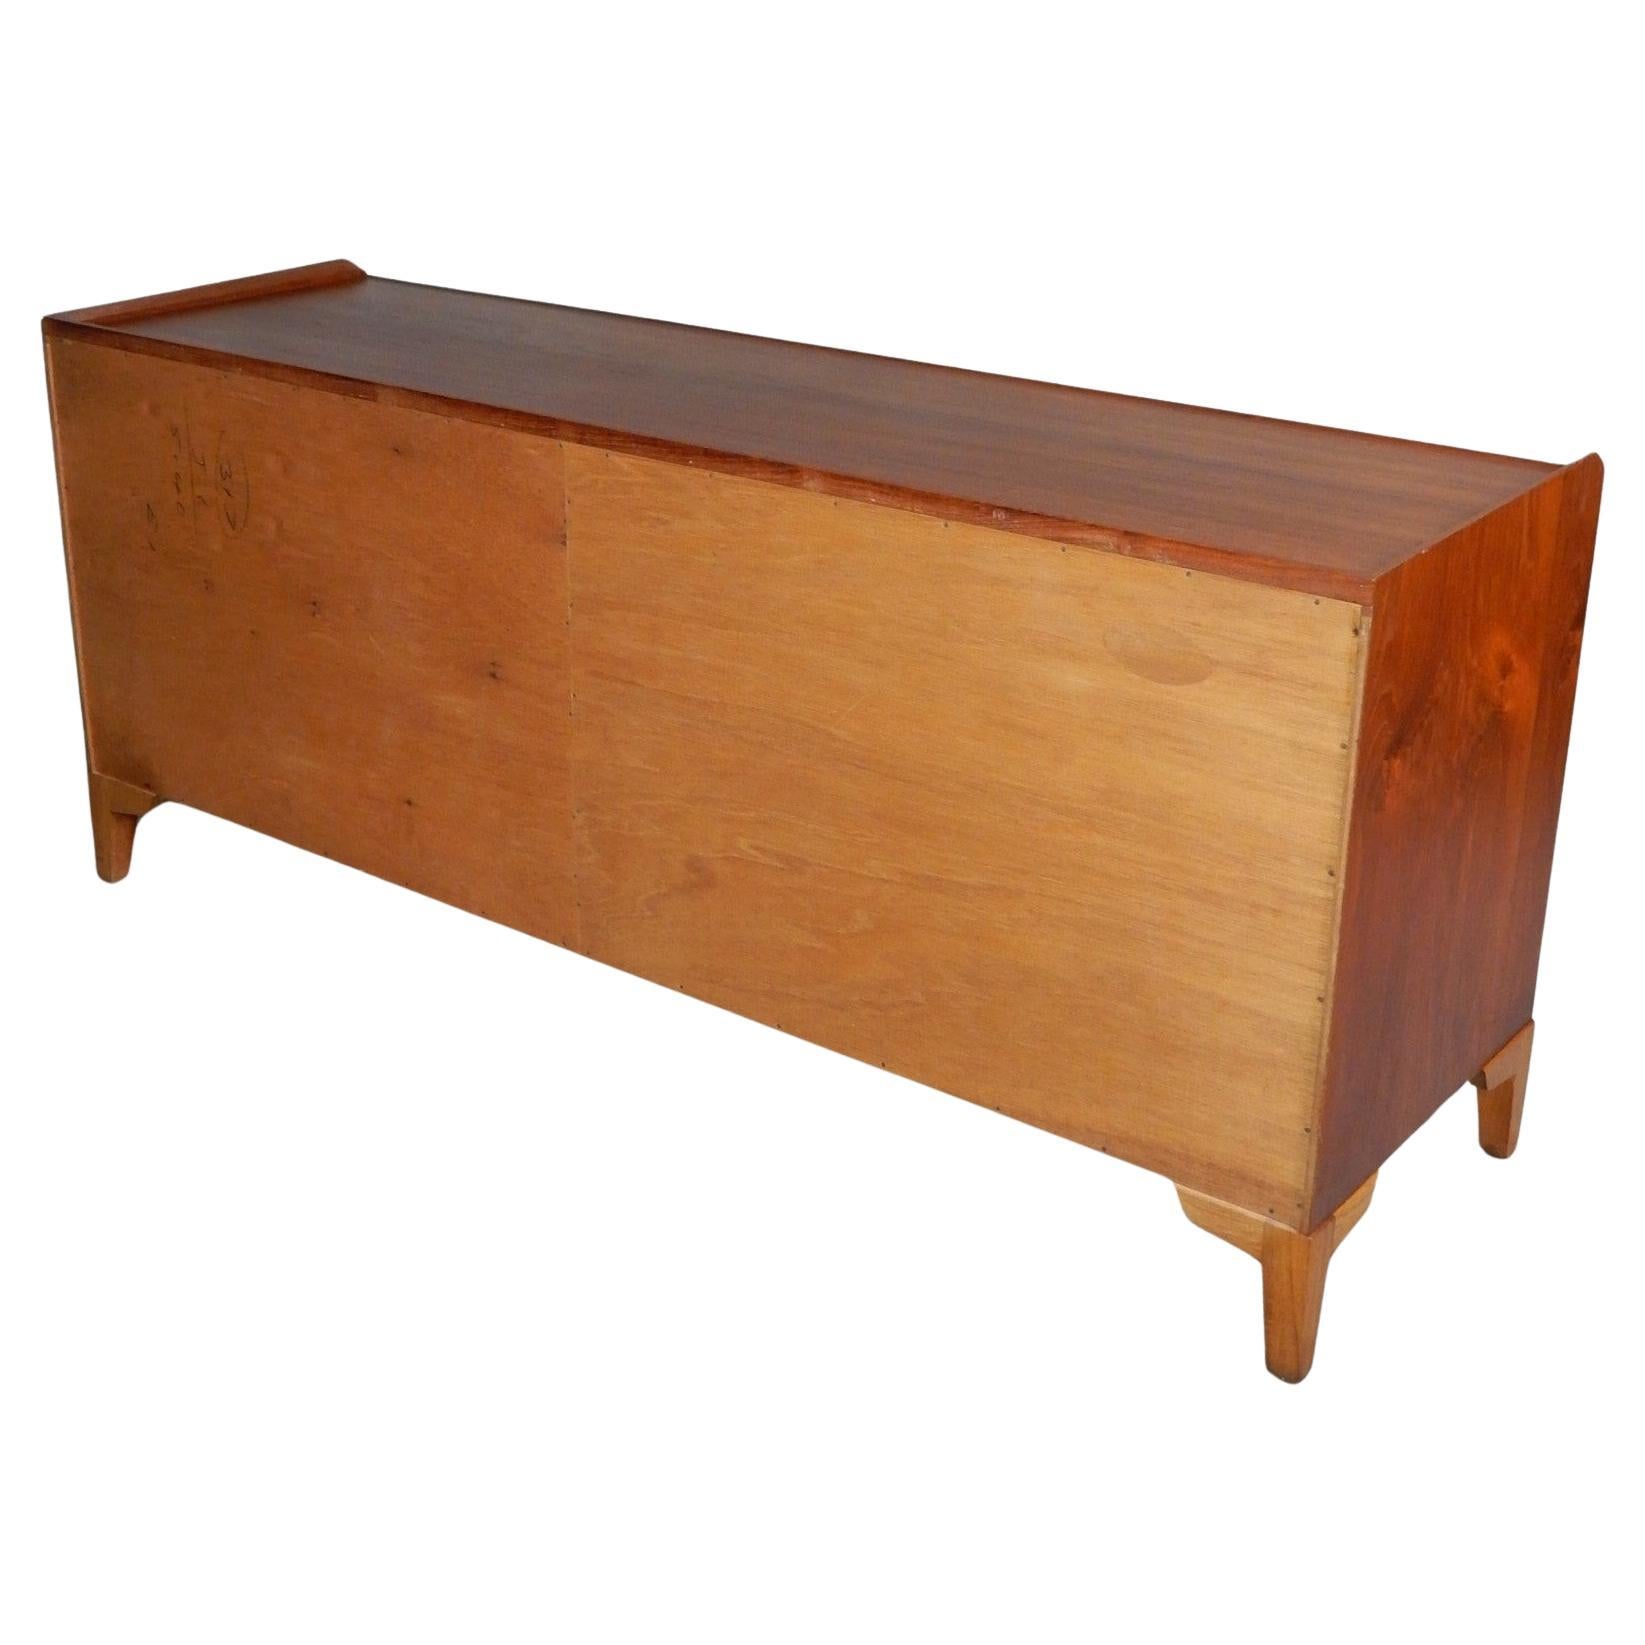 Mid Century Walnut Low Chest of Drawers by Charles Pechanec 1950's For Sale 3